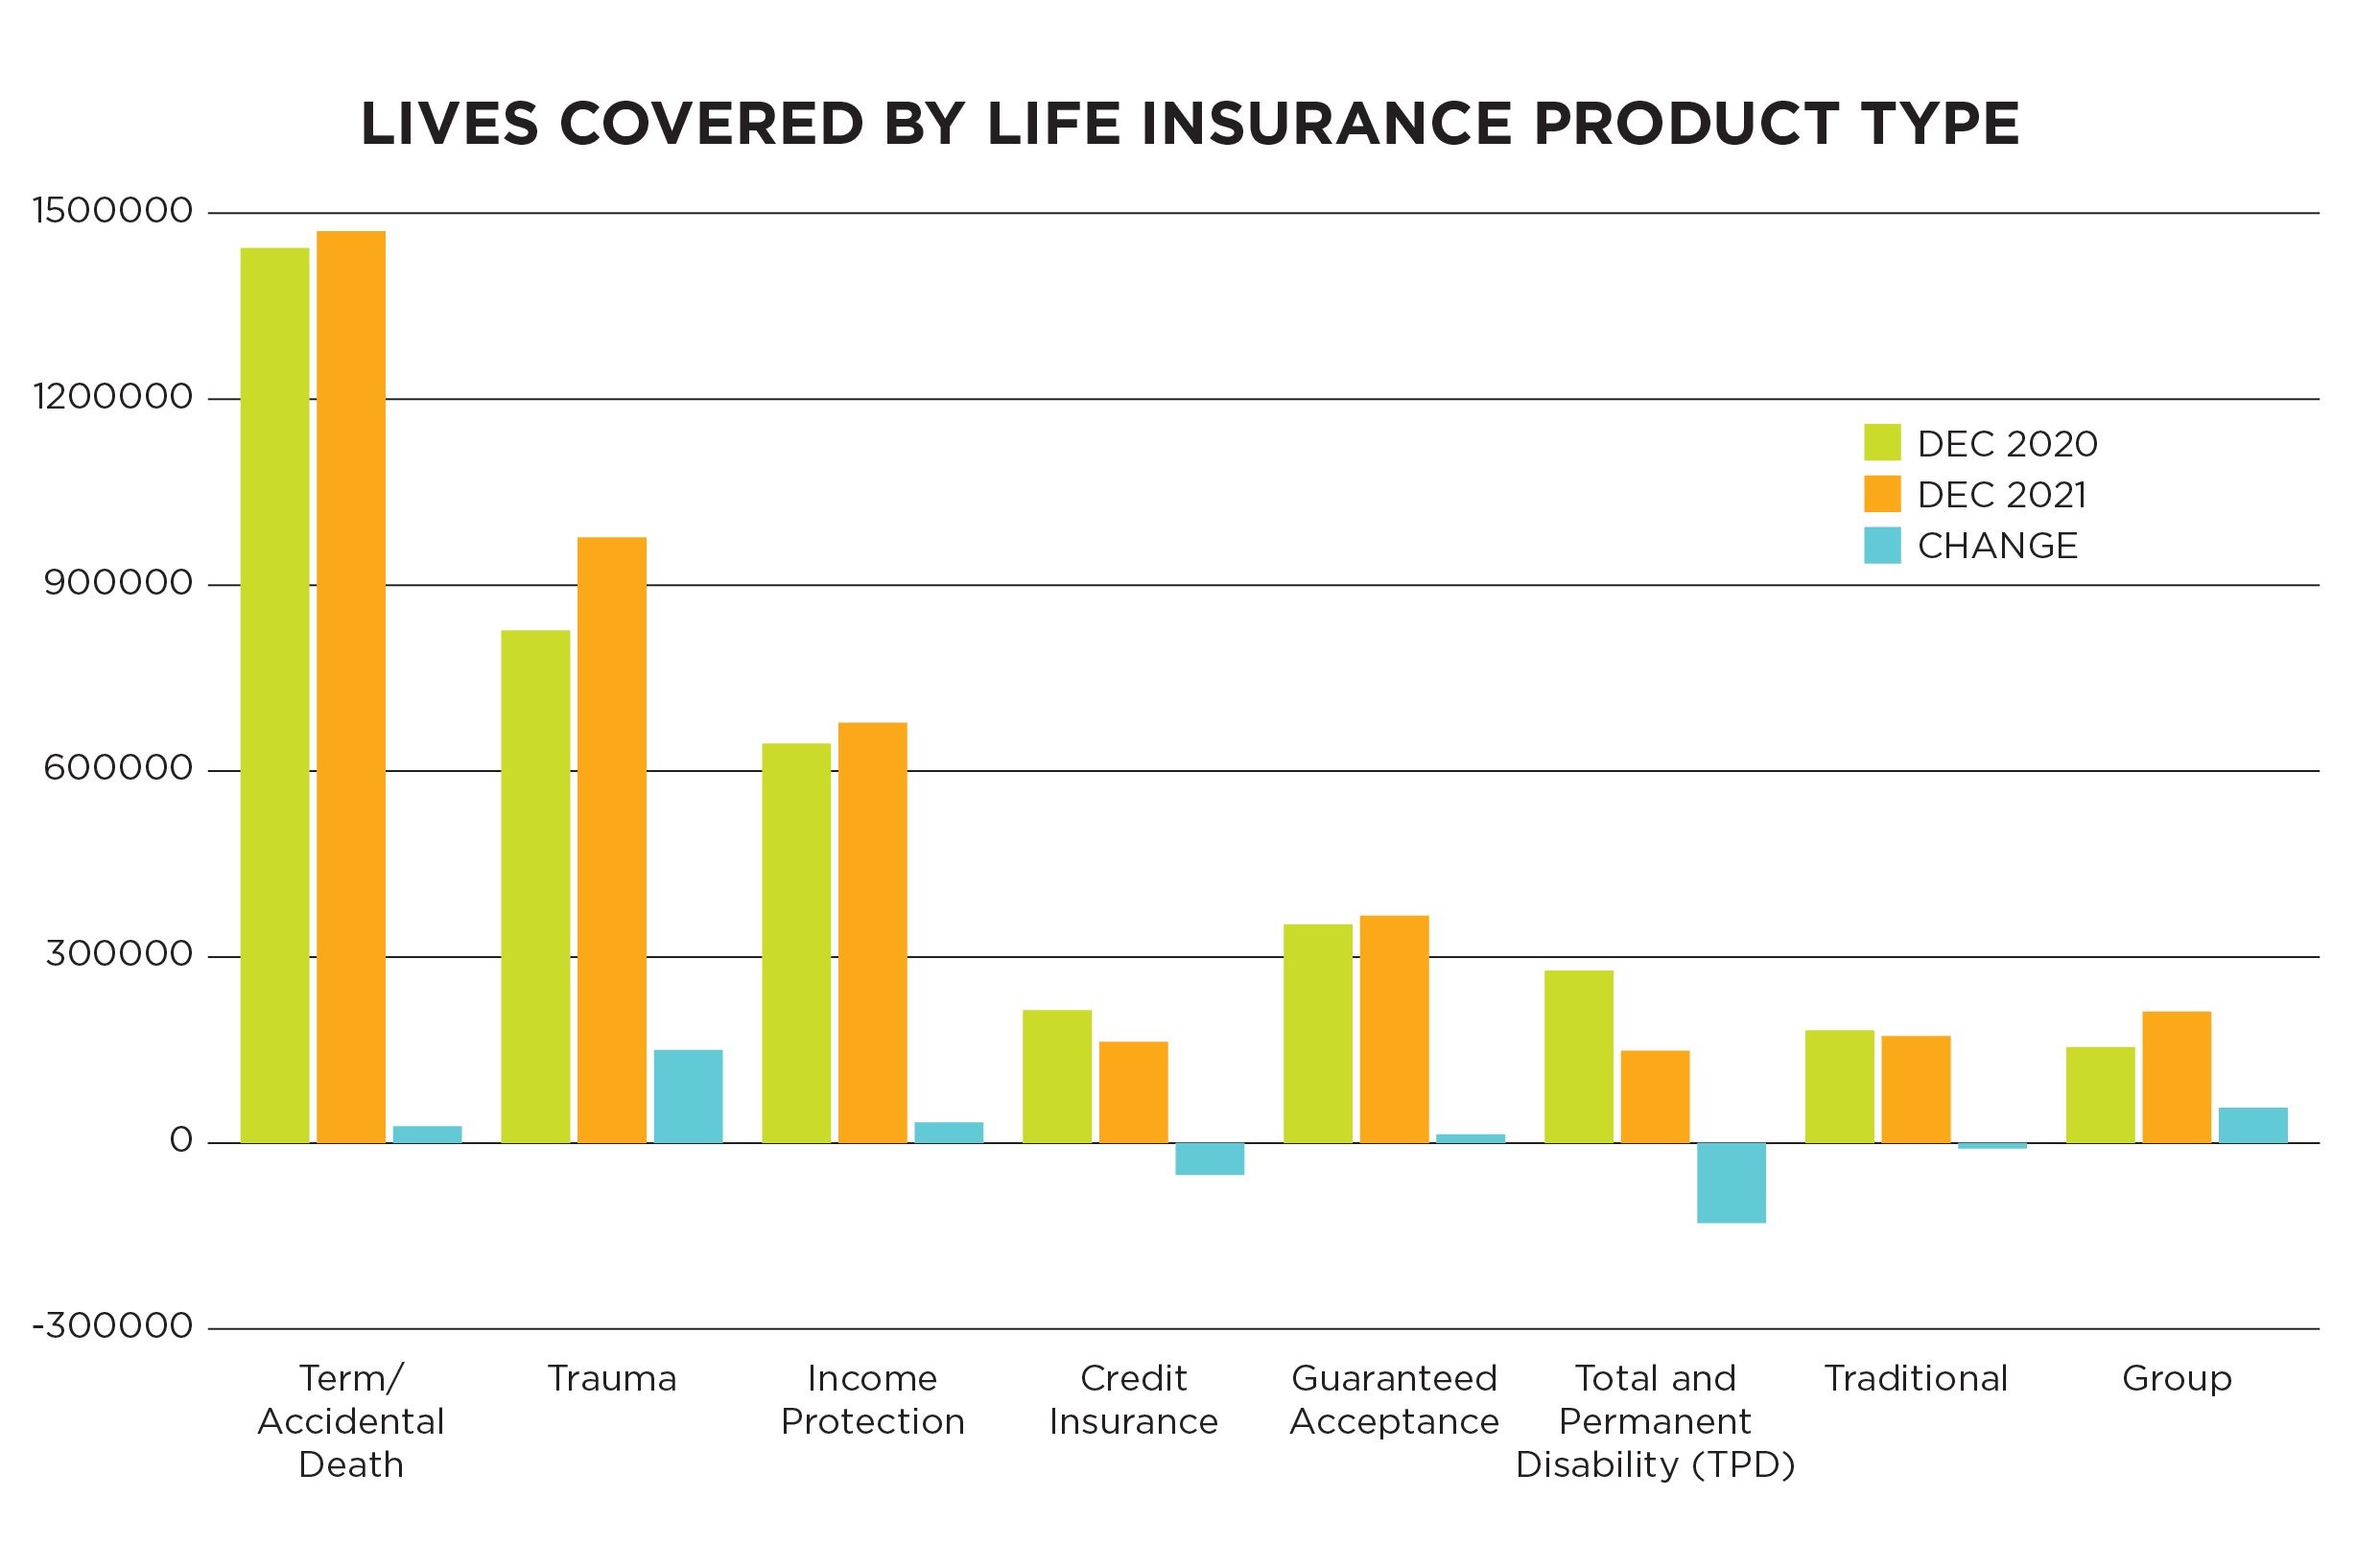 Lives covered by Life Insurance Product Type - Financial Services Council - December 2021